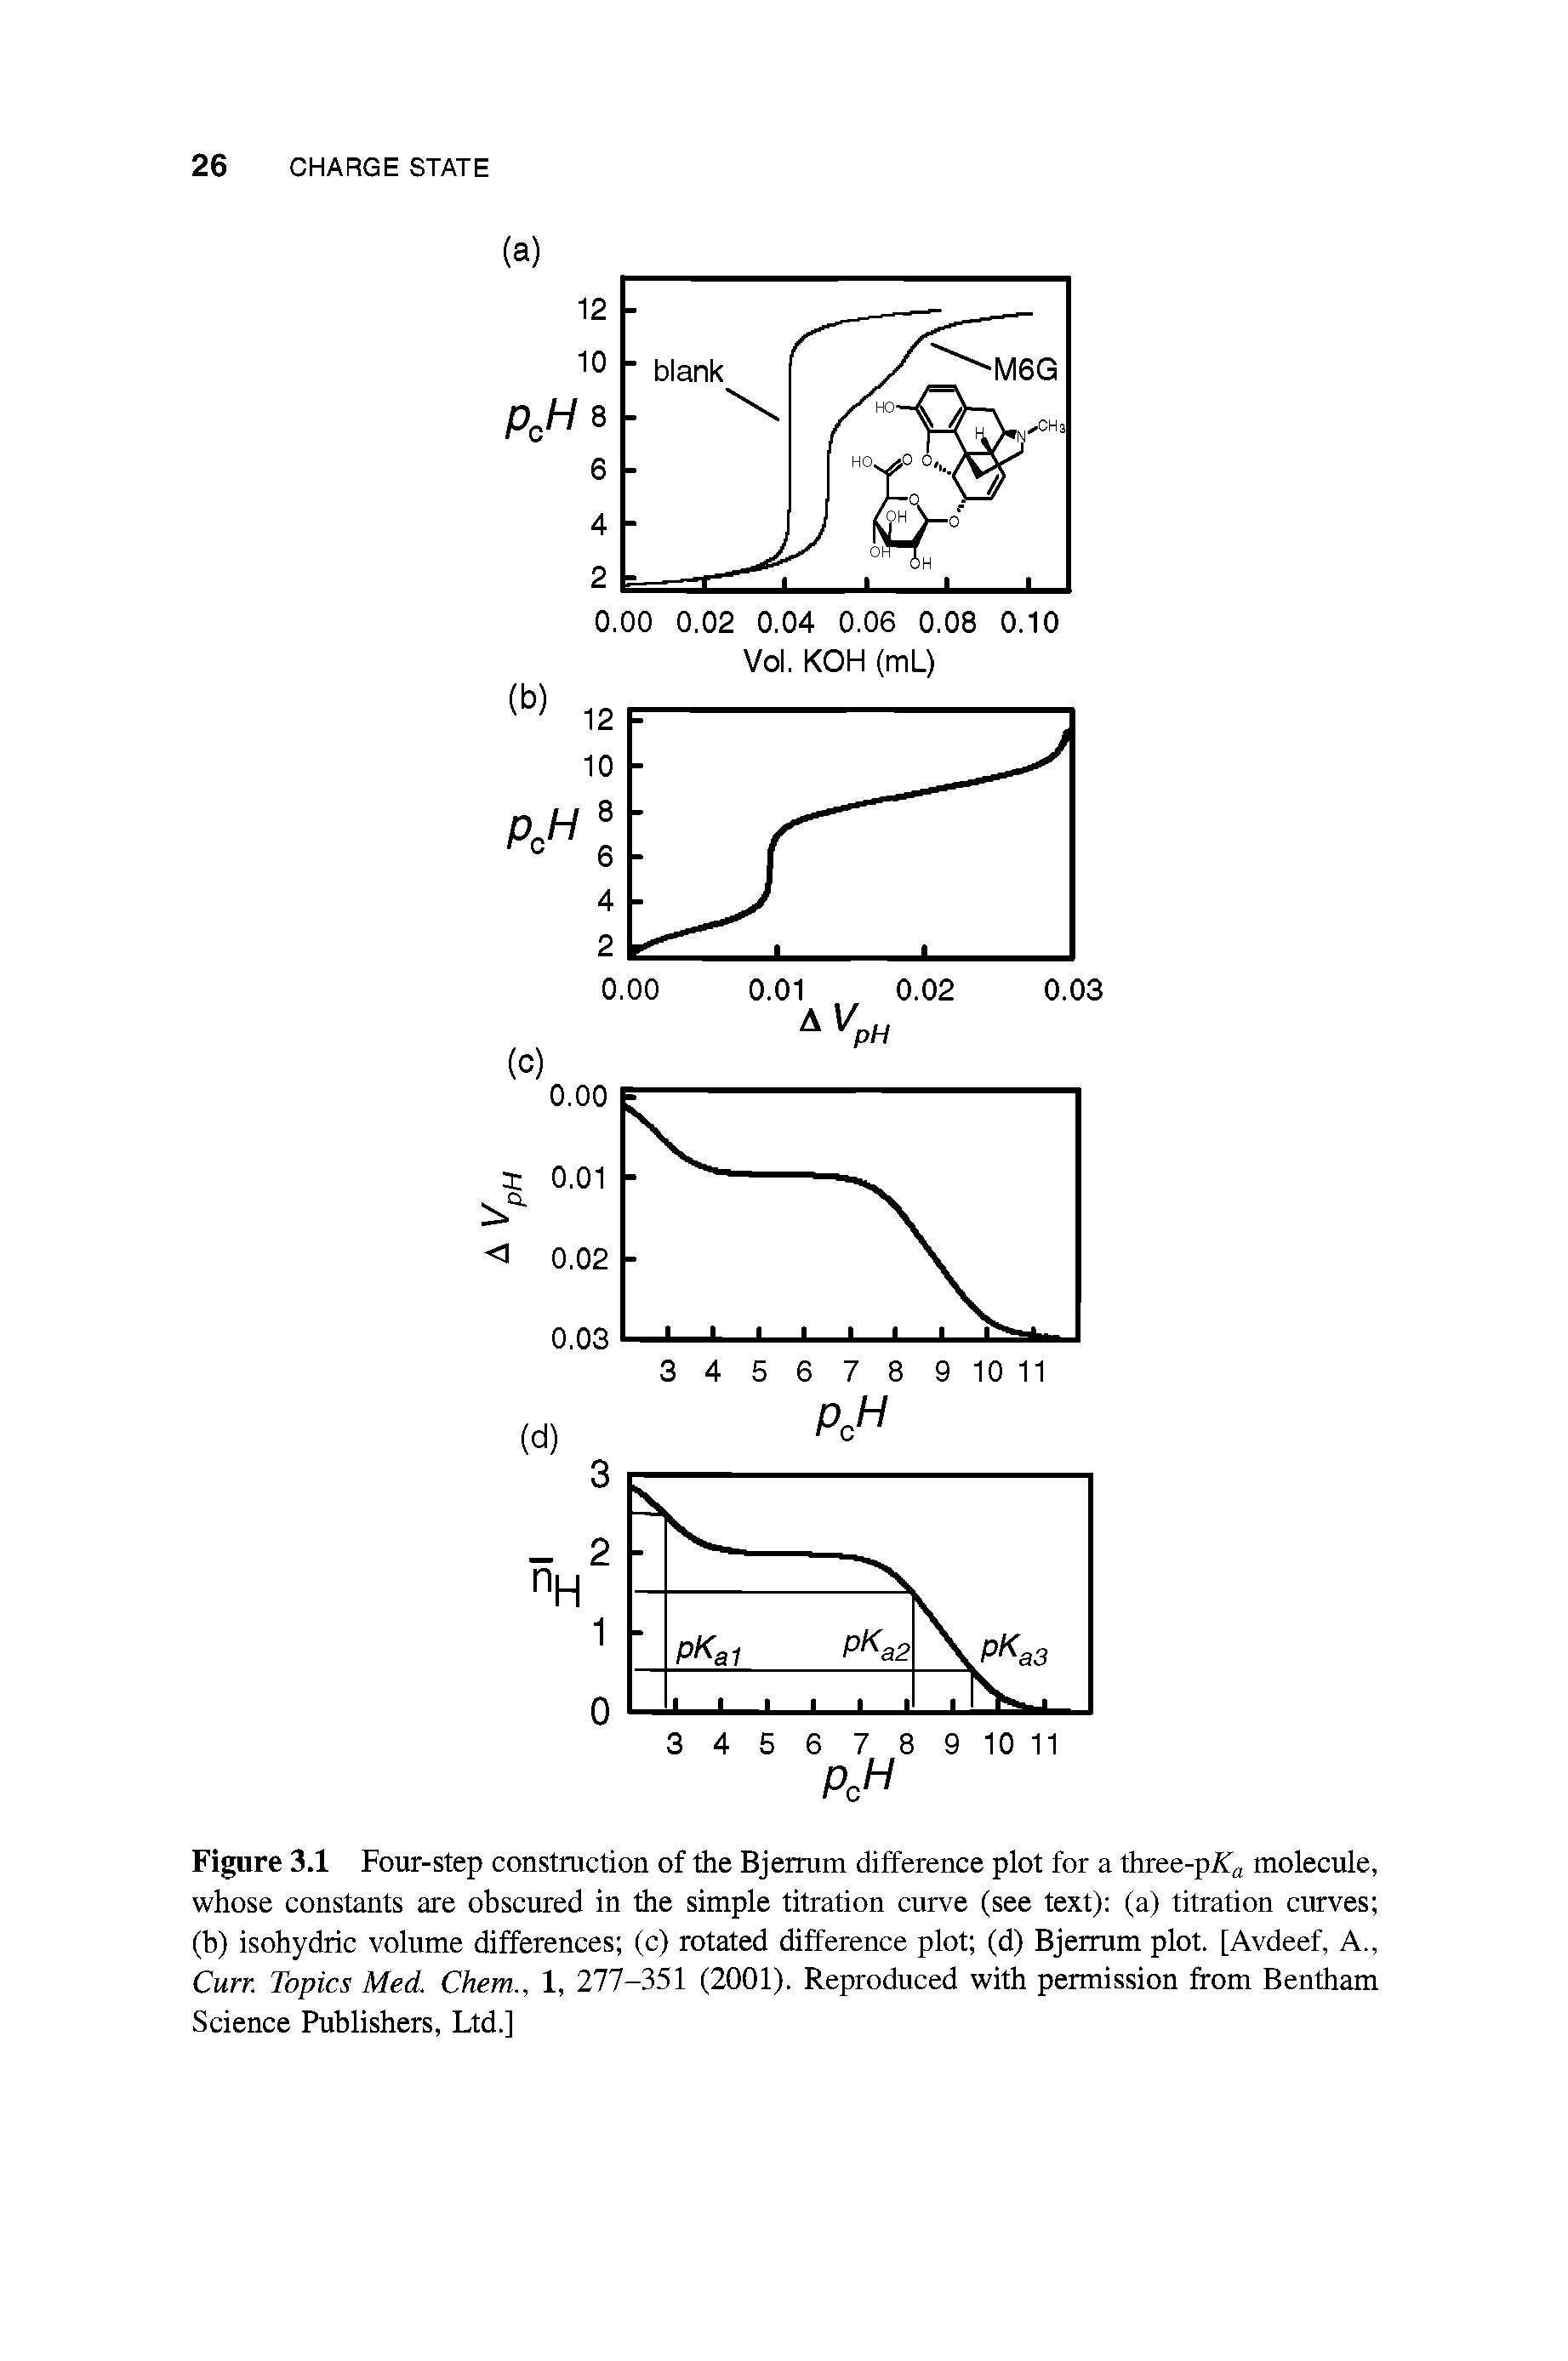 Figure 3.1 Four-step construction of the Bjerrum difference plot for a three-pi molecule, whose constants are obscured in the simple titration curve (see text) (a) titration curves (b) isohydric volume differences (c) rotated difference plot (d) Bjerrum plot. [Avdeef, A., Curr. Topics Med. Chem., 1, 277-351 (2001). Reproduced with permission from Bentham Science Publishers, Ltd.]...